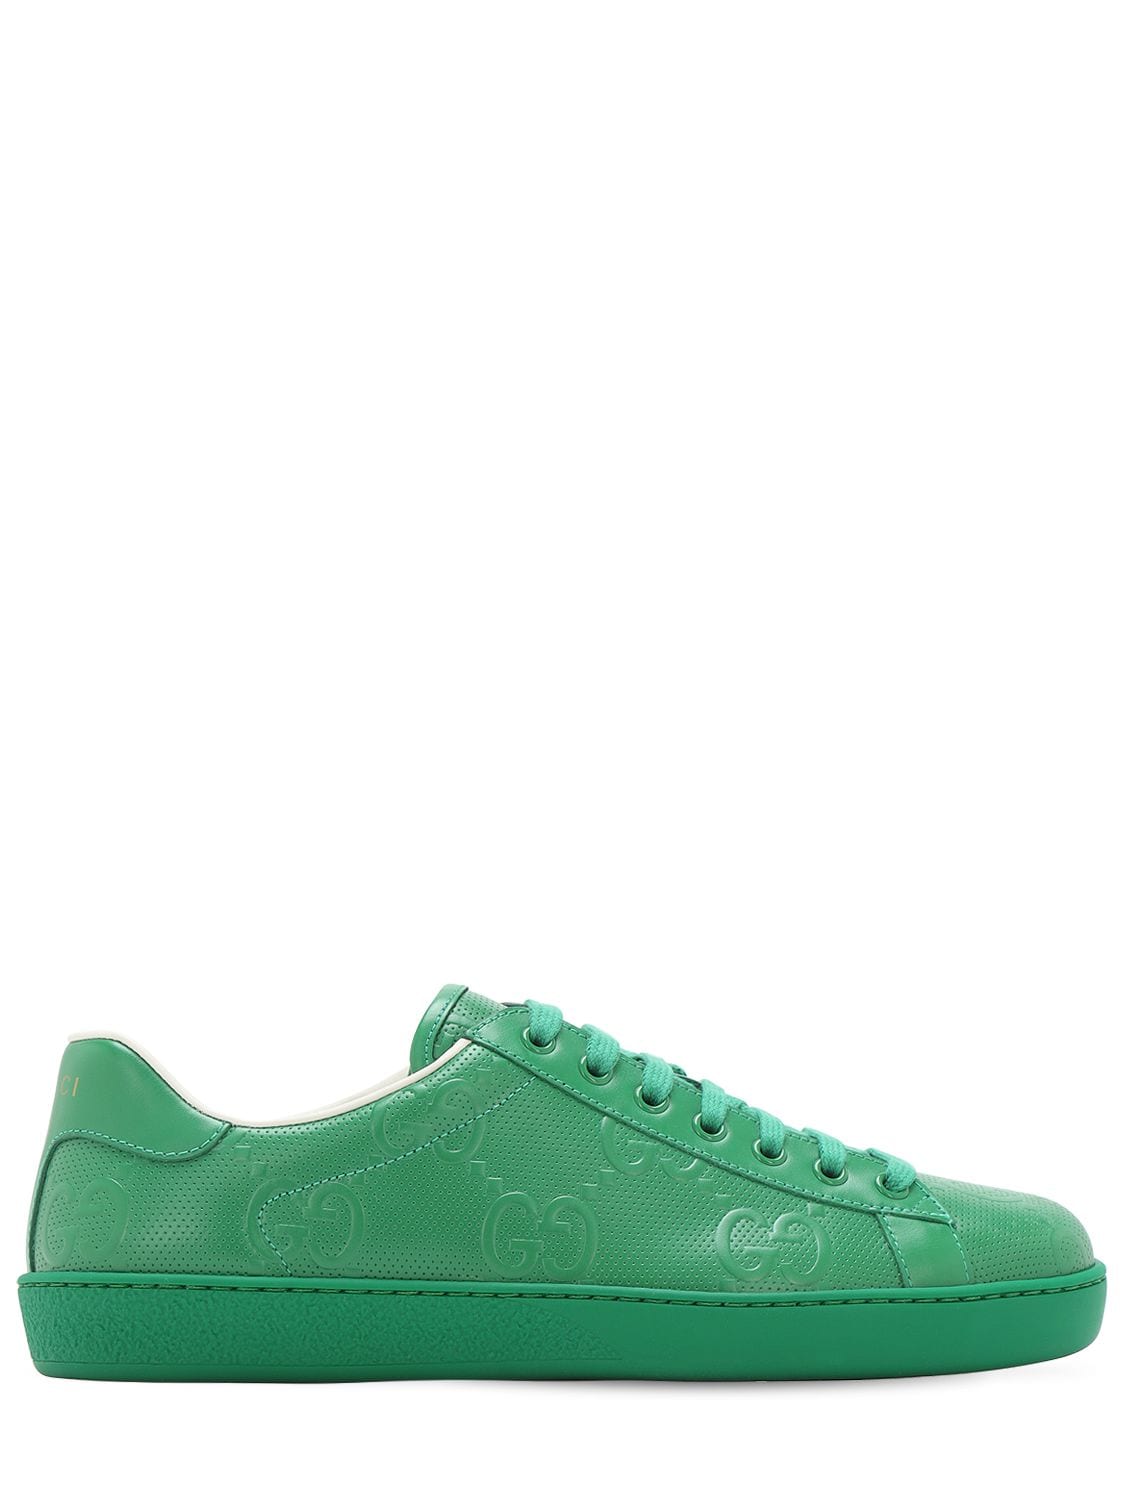 GUCCI NEW ACE GG EMBOSSED LEATHER SNEAKERS,72IH0M008-MZCYNW2